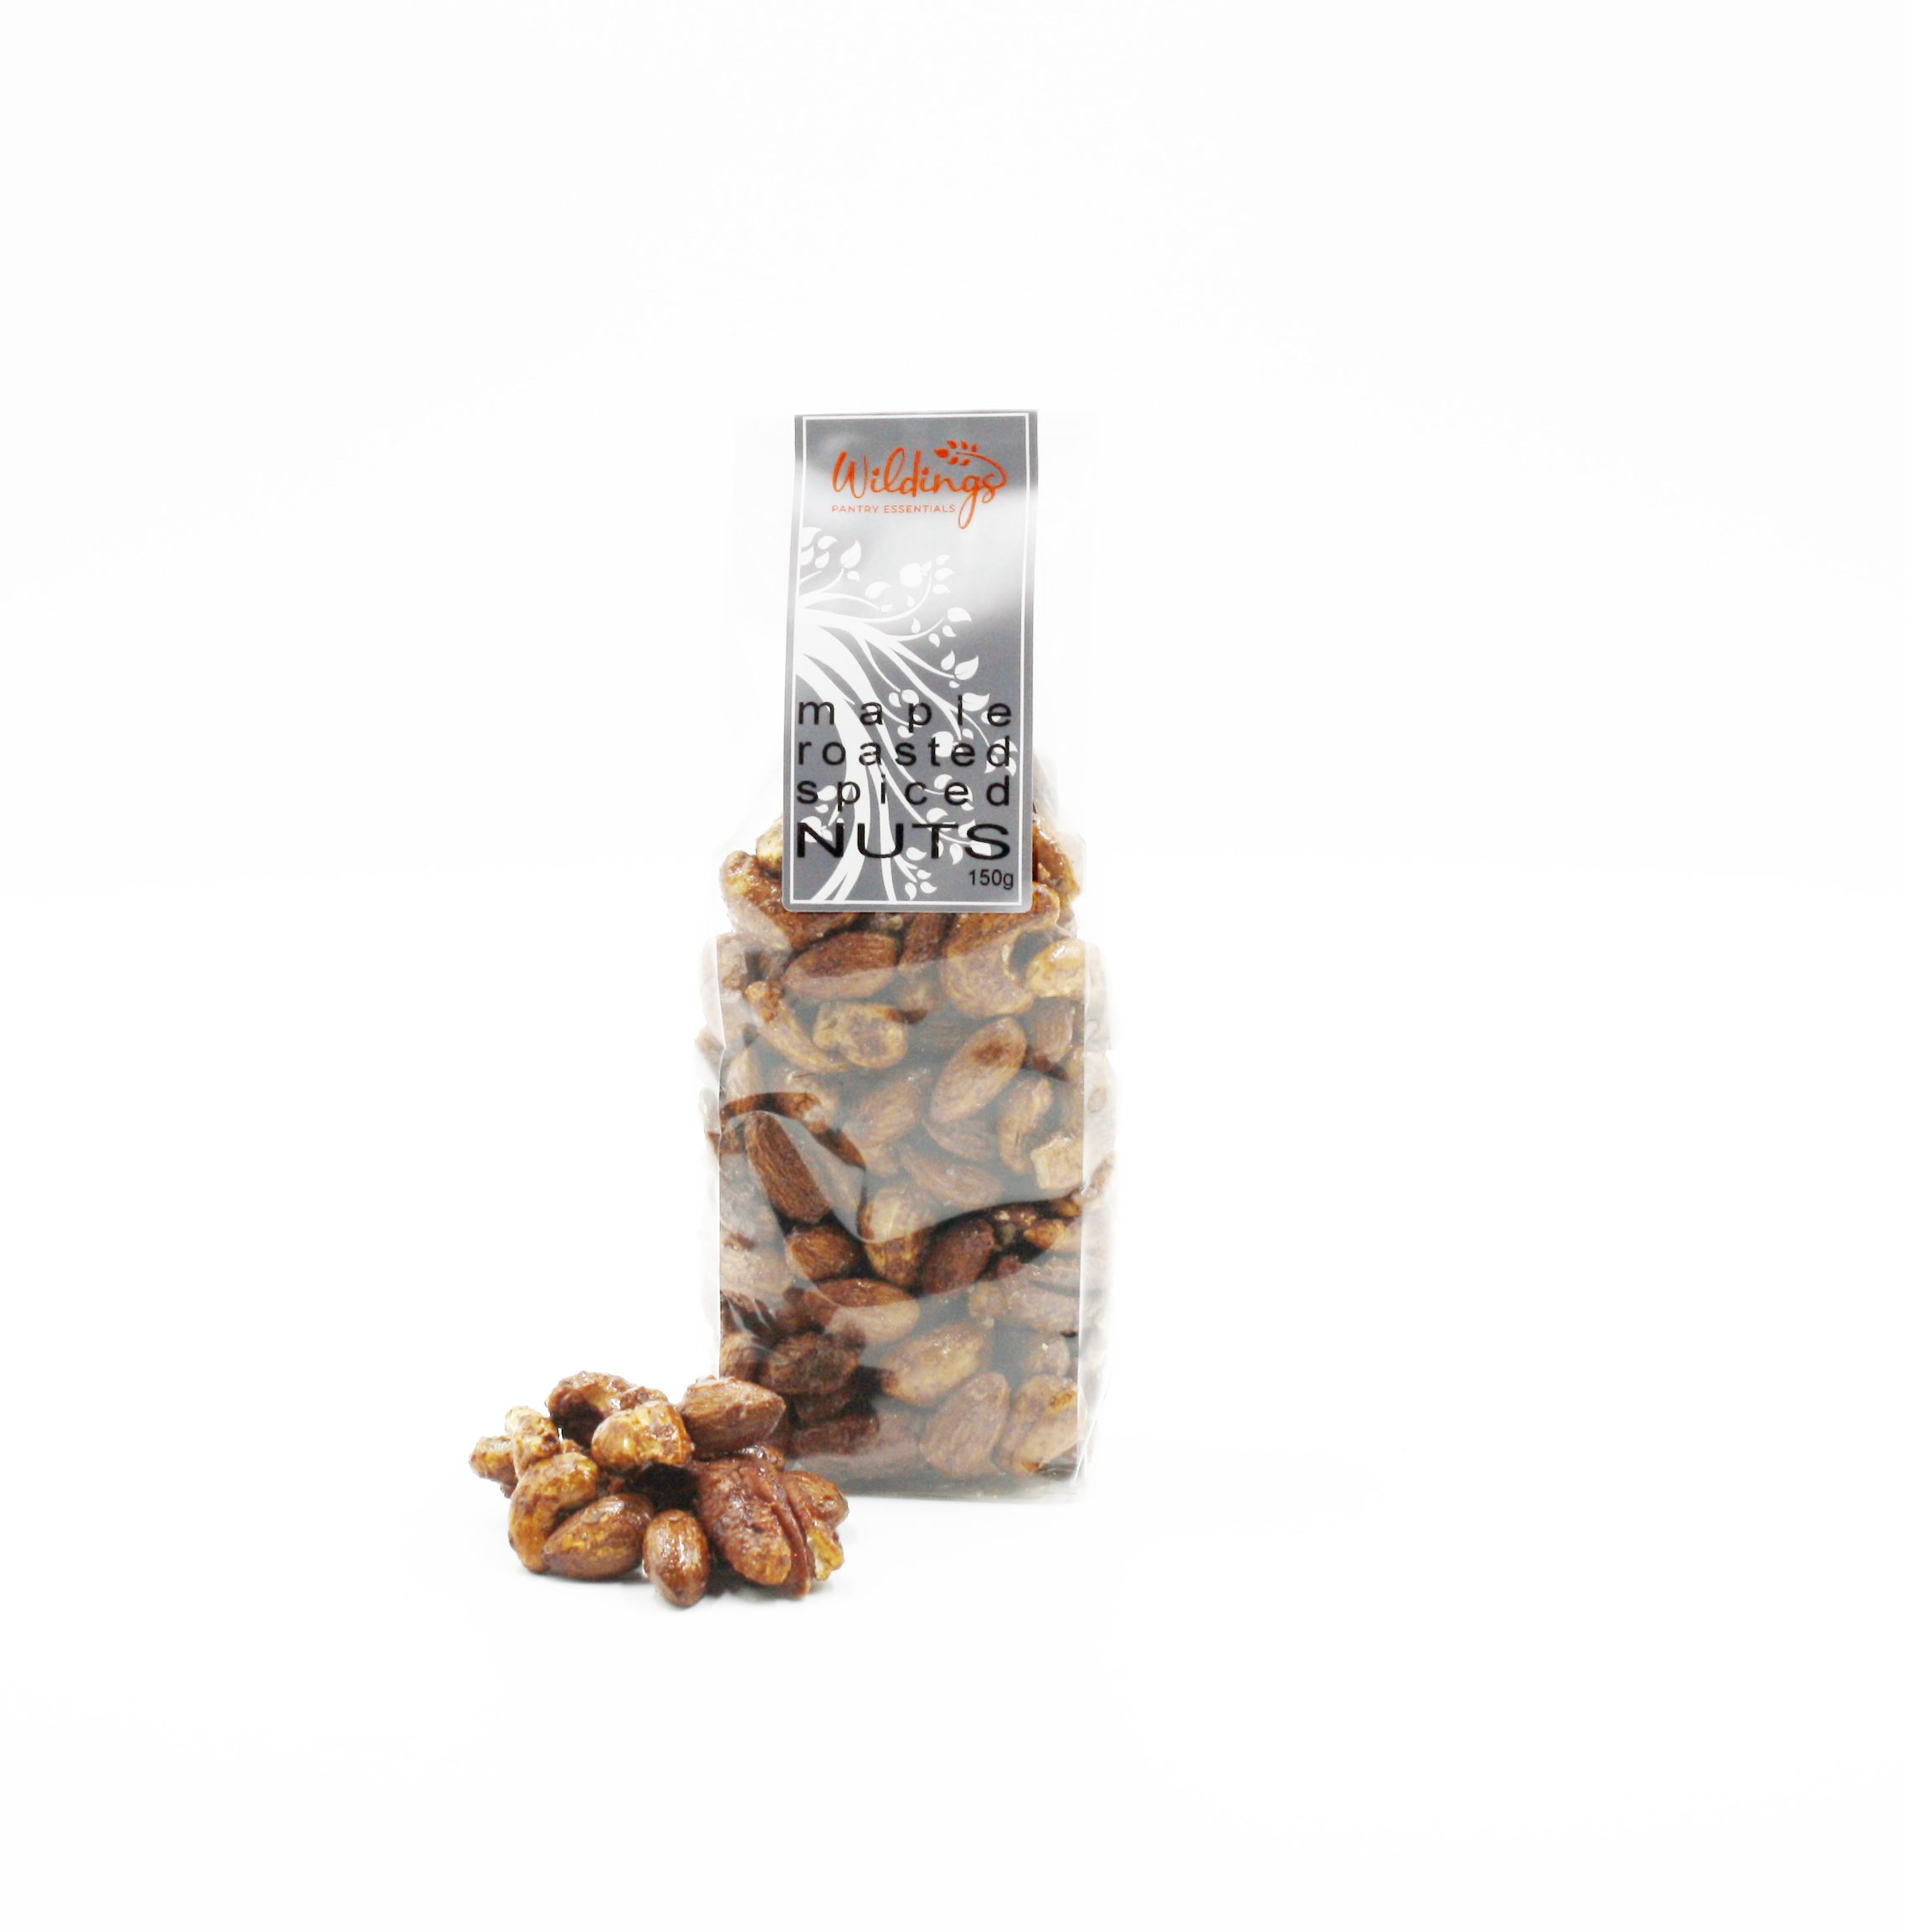 Maple Roasted Spiced Nuts